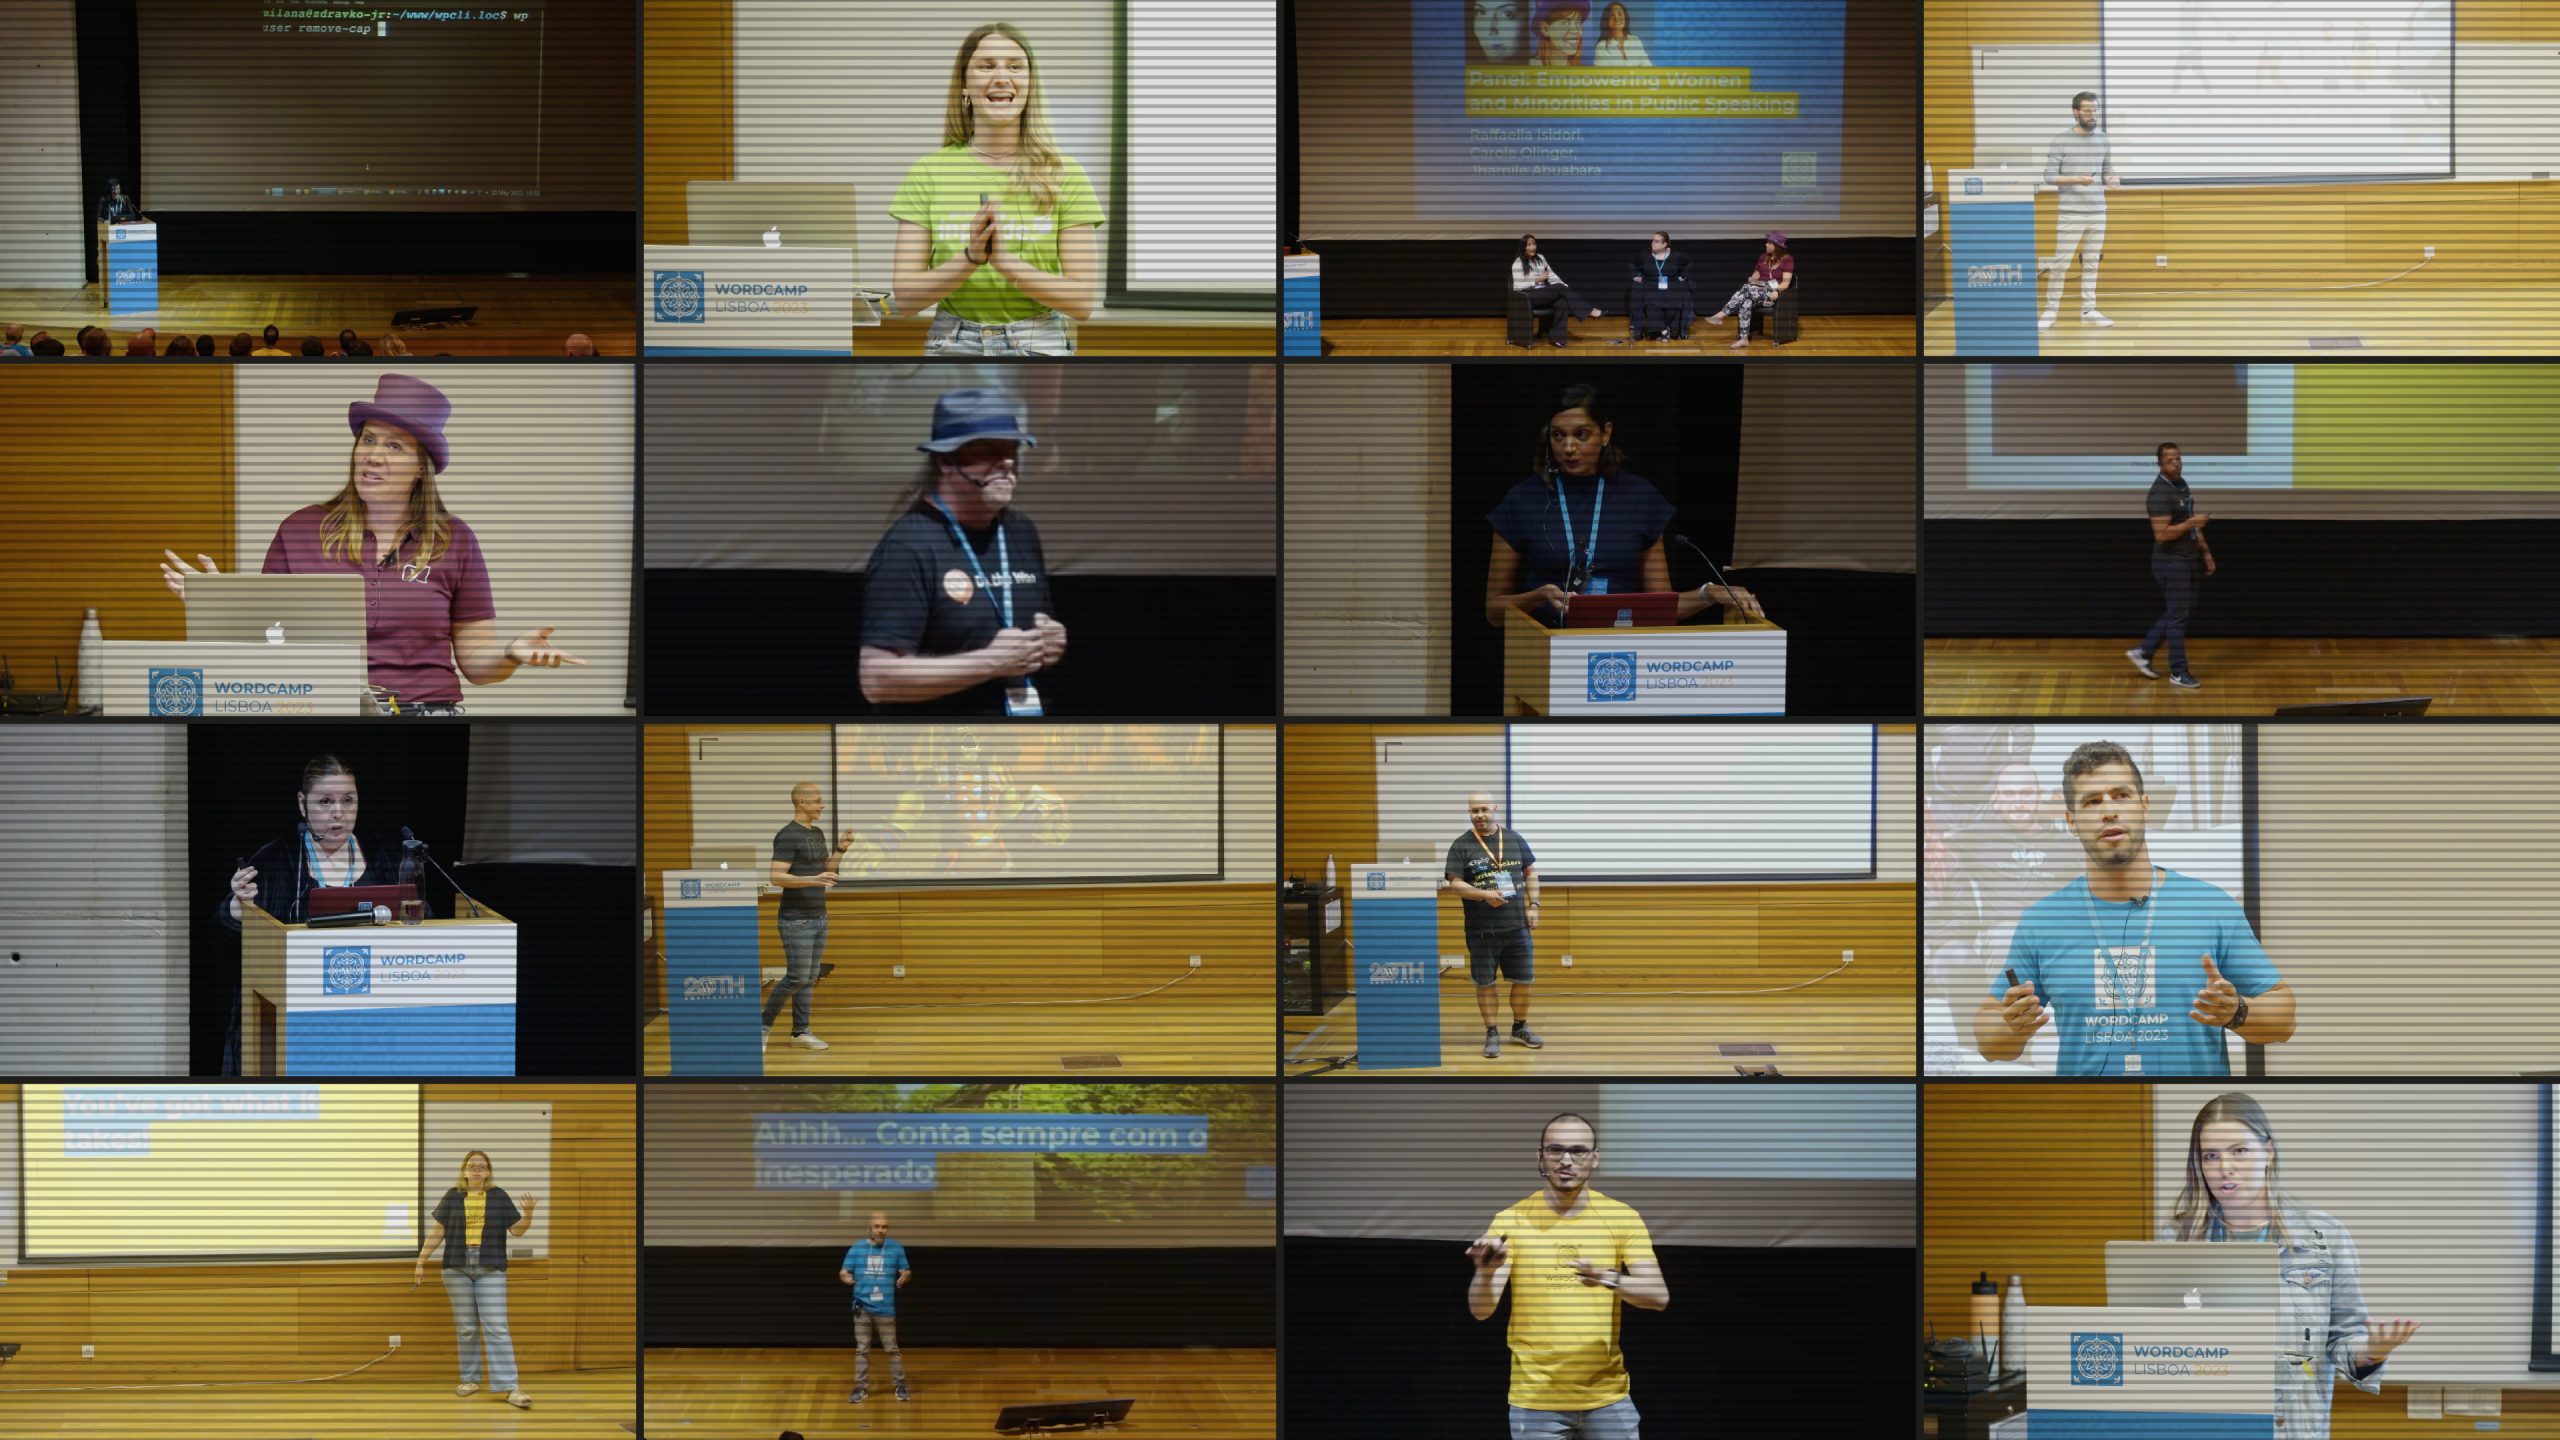 All presentations are now available online on WordPress.tv